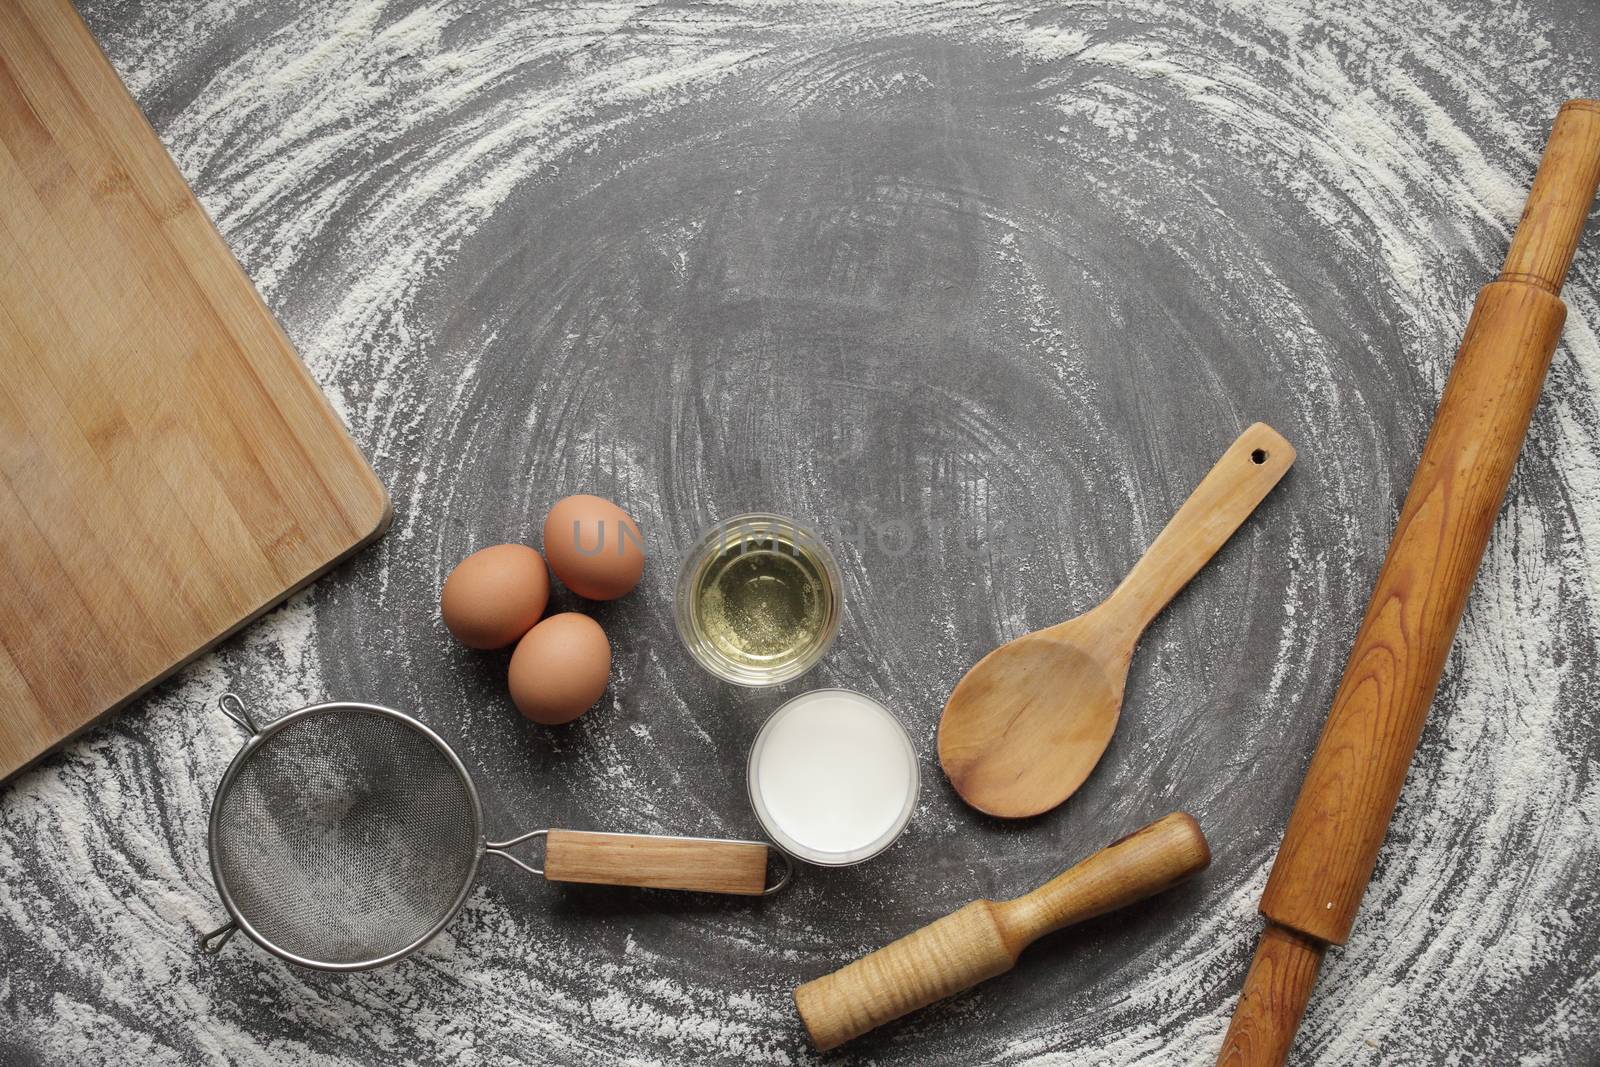 Chicken egg, flour, olive oil, milk, kitchen tool on gray table background. Products for baking bakery products. Cutting board, rolling pin, flour sieve, wooden spoon. For bread or cake